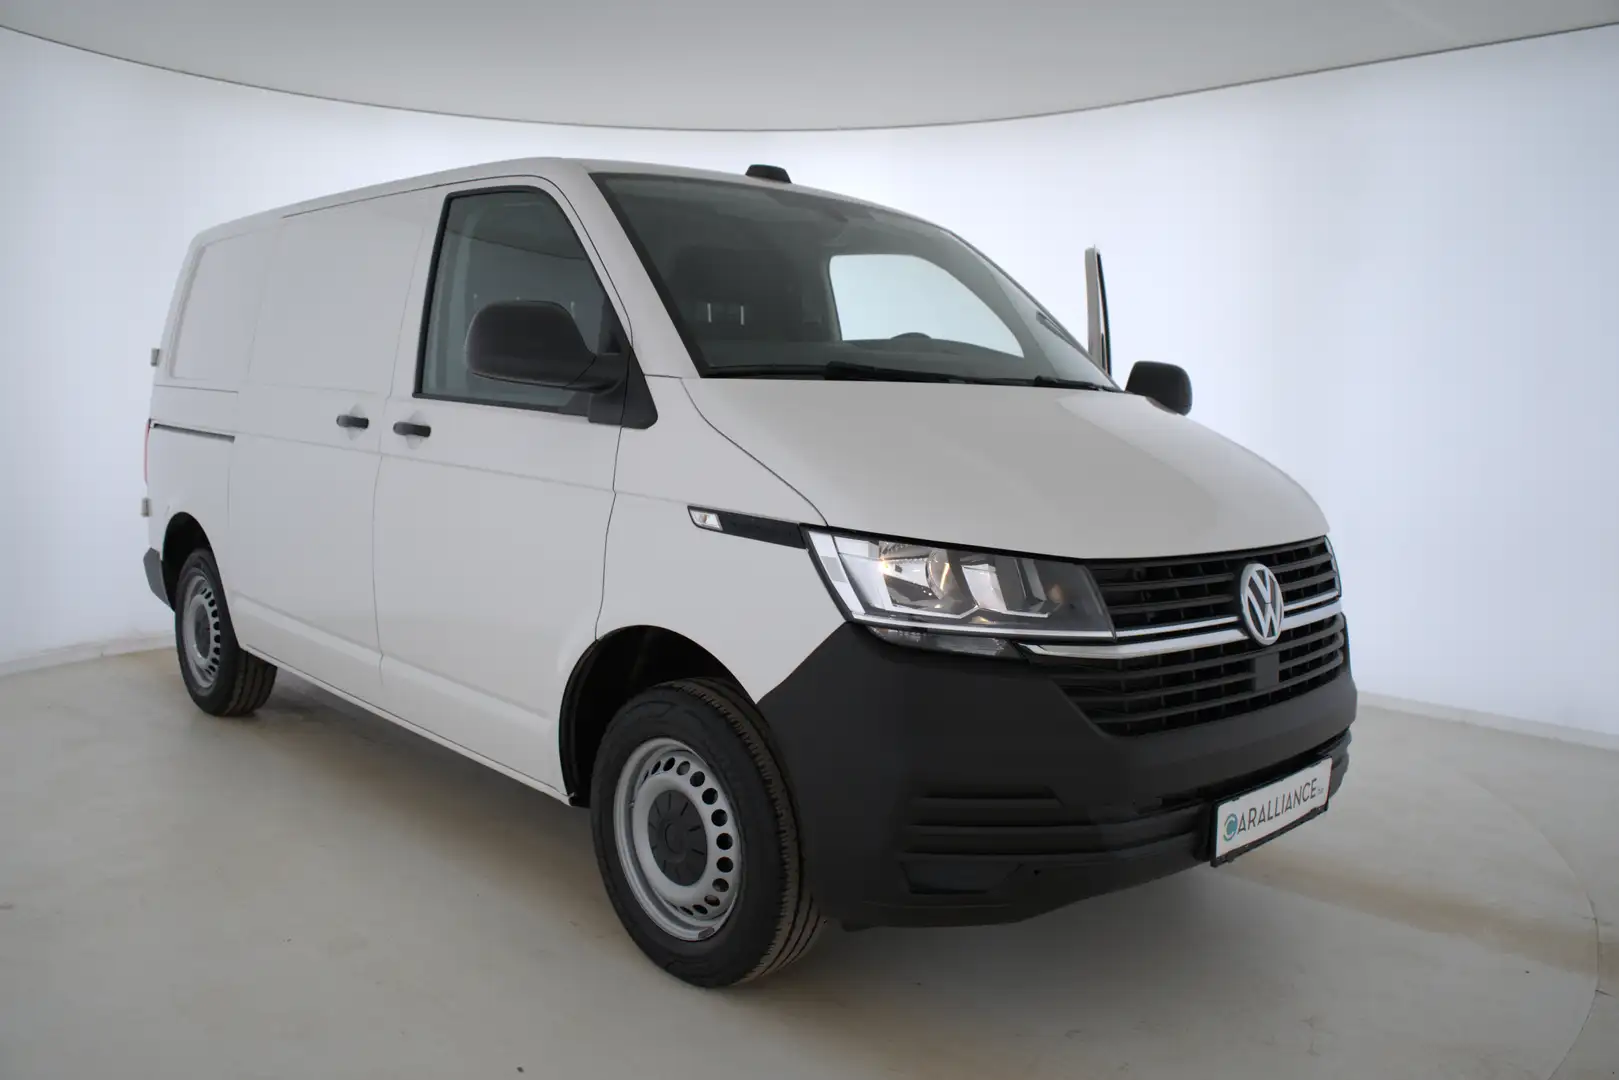 Volkswagen T6 Transporter Fourgon  2.0TDI|APP-CONNECT|3PLACES|AIRCO Wit - 2